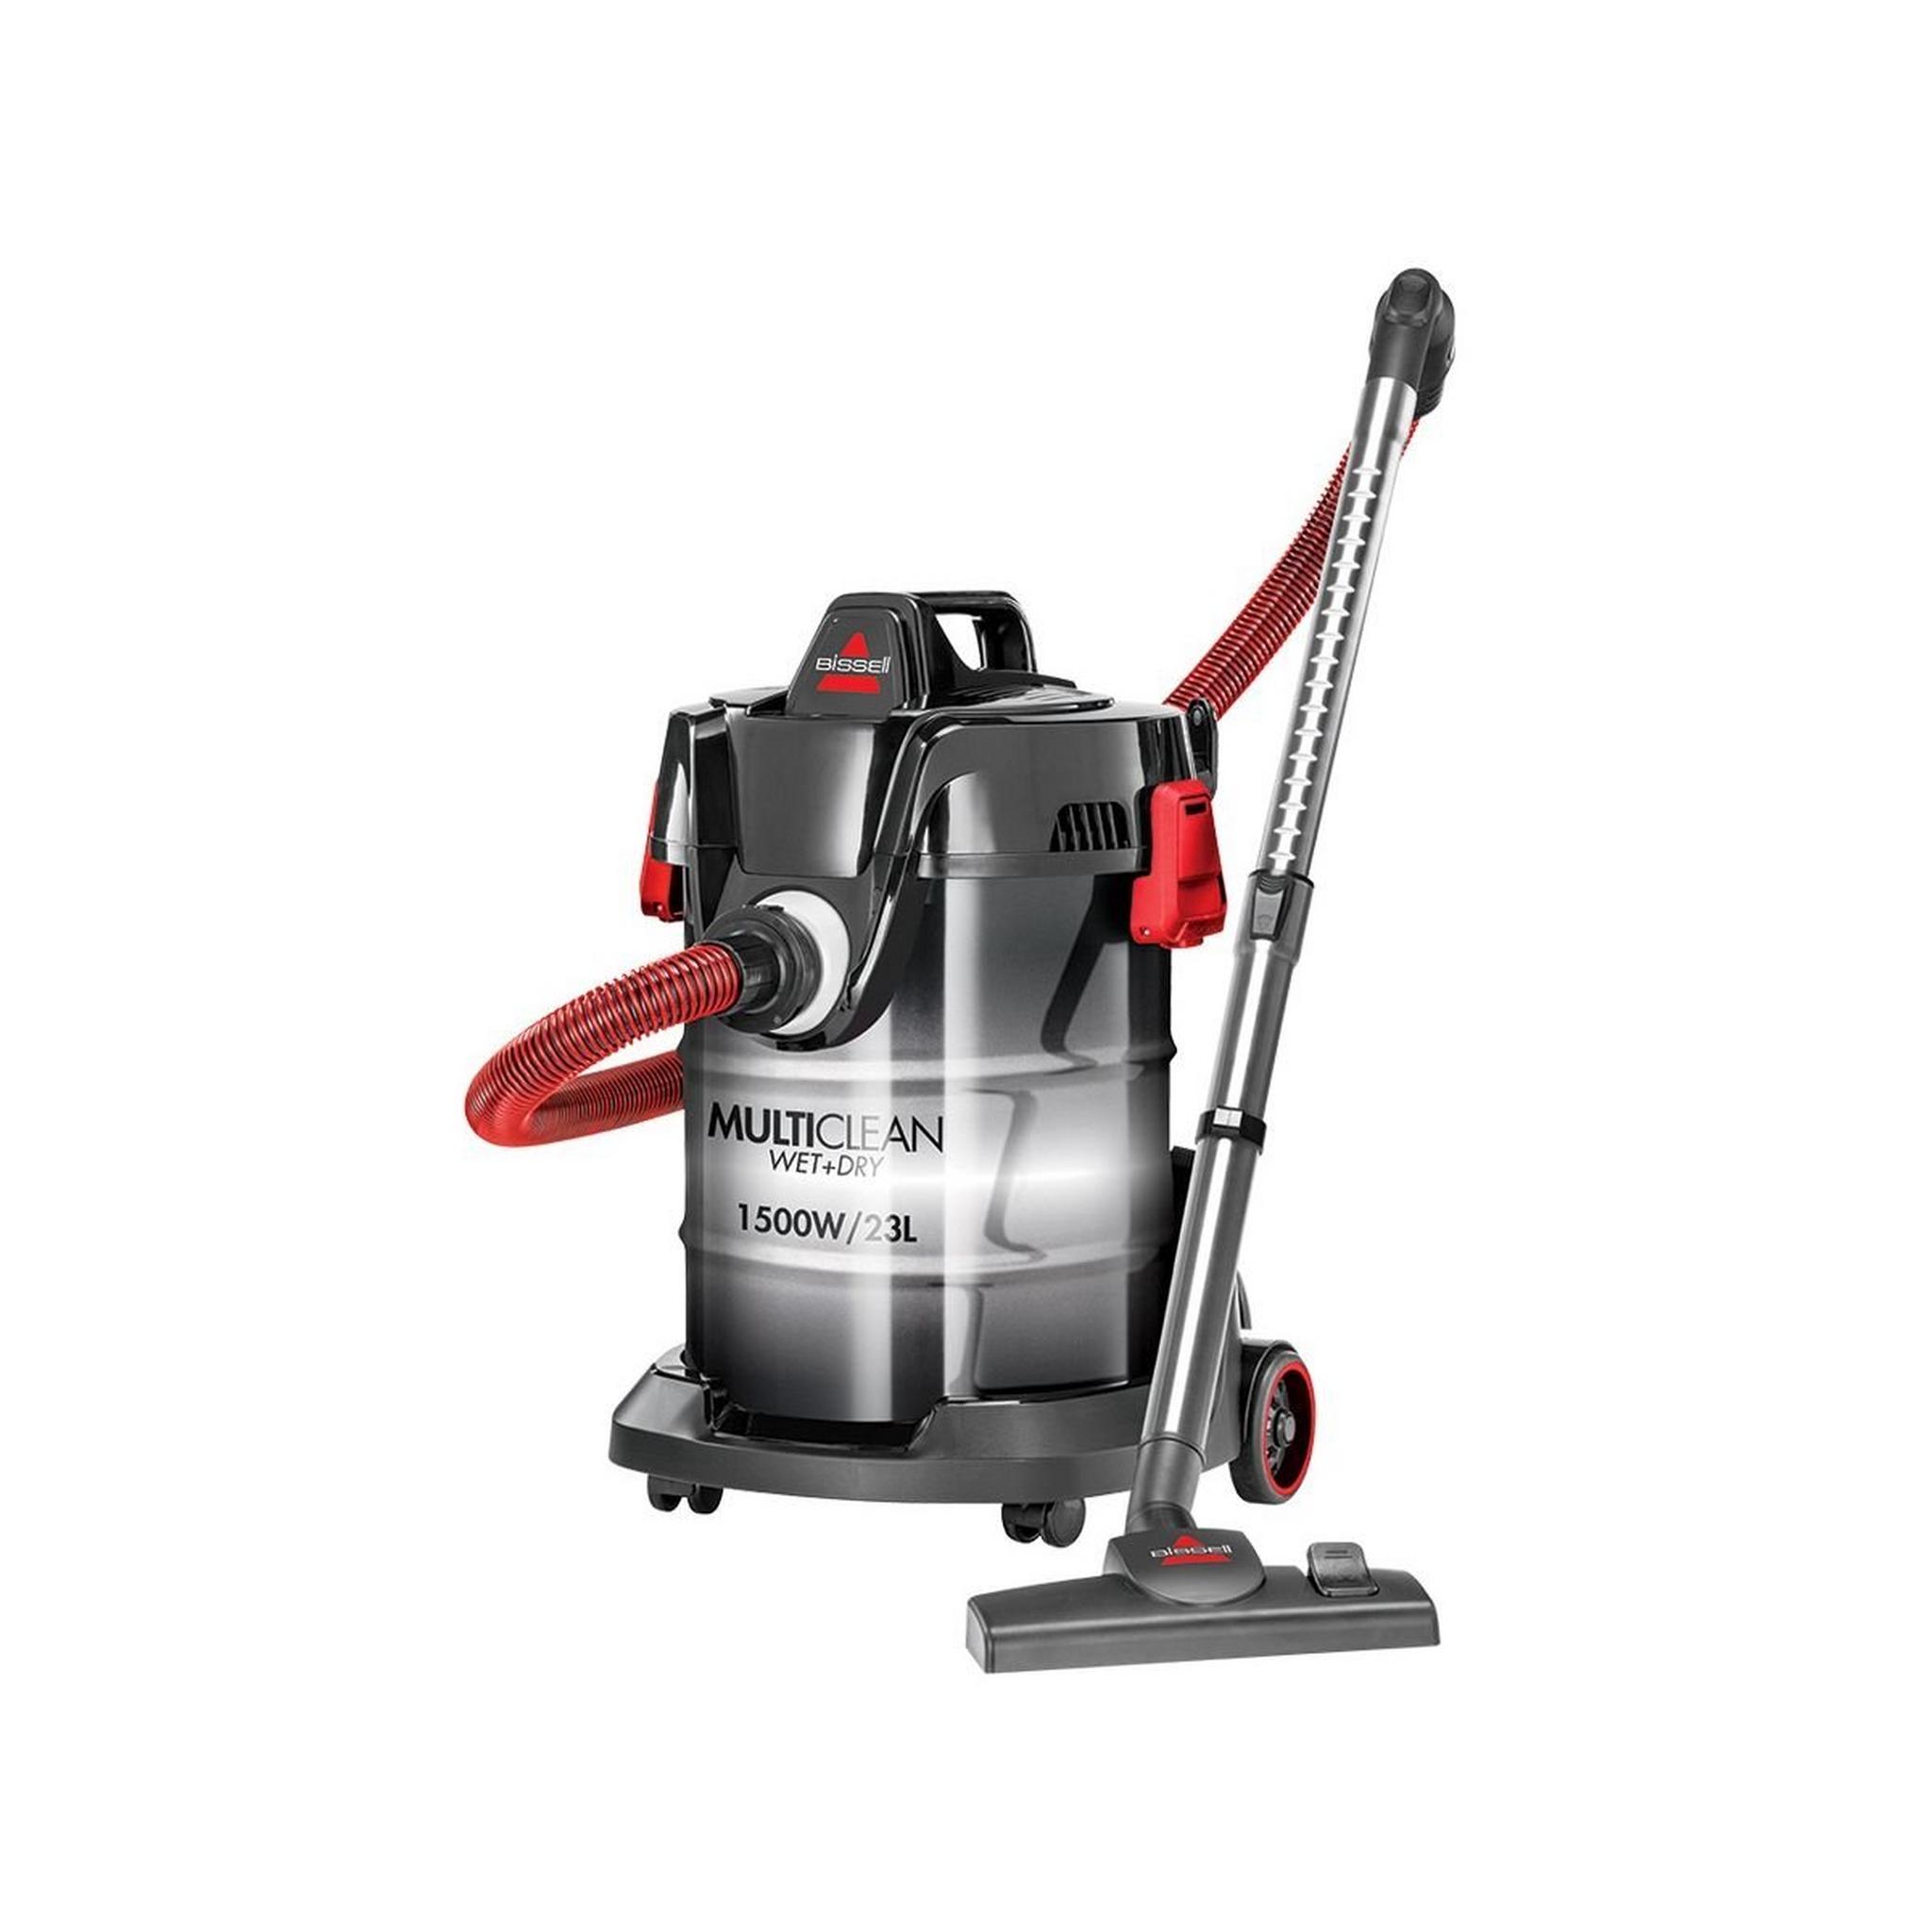 Bissell Wet And Dry Vacuum Cleaner,1500W, 23 Liter, 2026K - Black